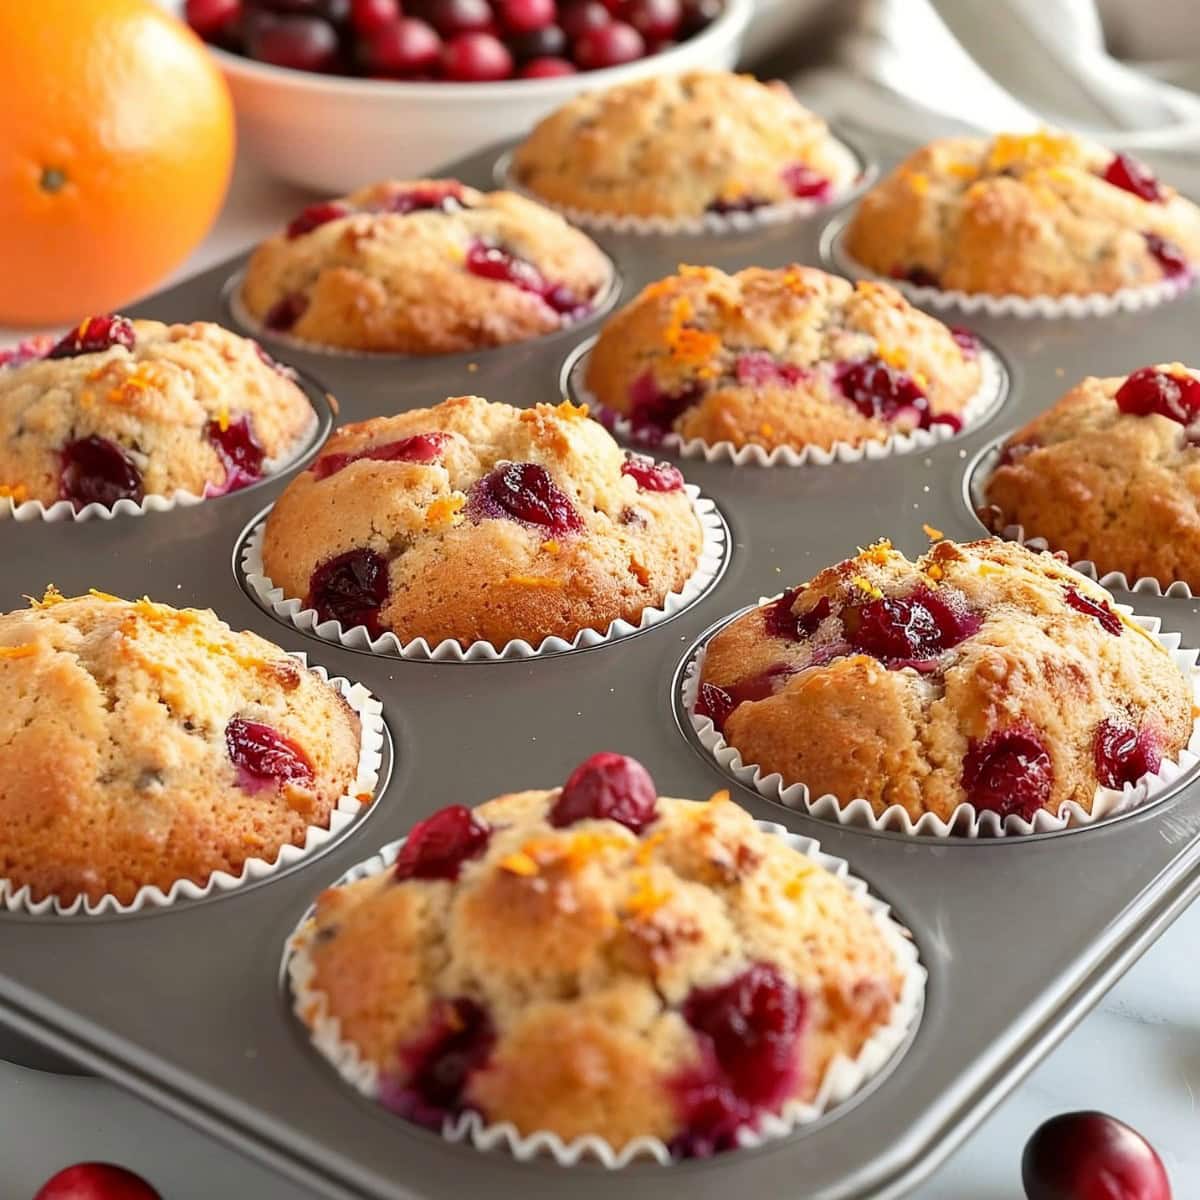 Close Up Cranberry Orange Muffins in a Muffin Tray with Oranges and Cranberries in the Background